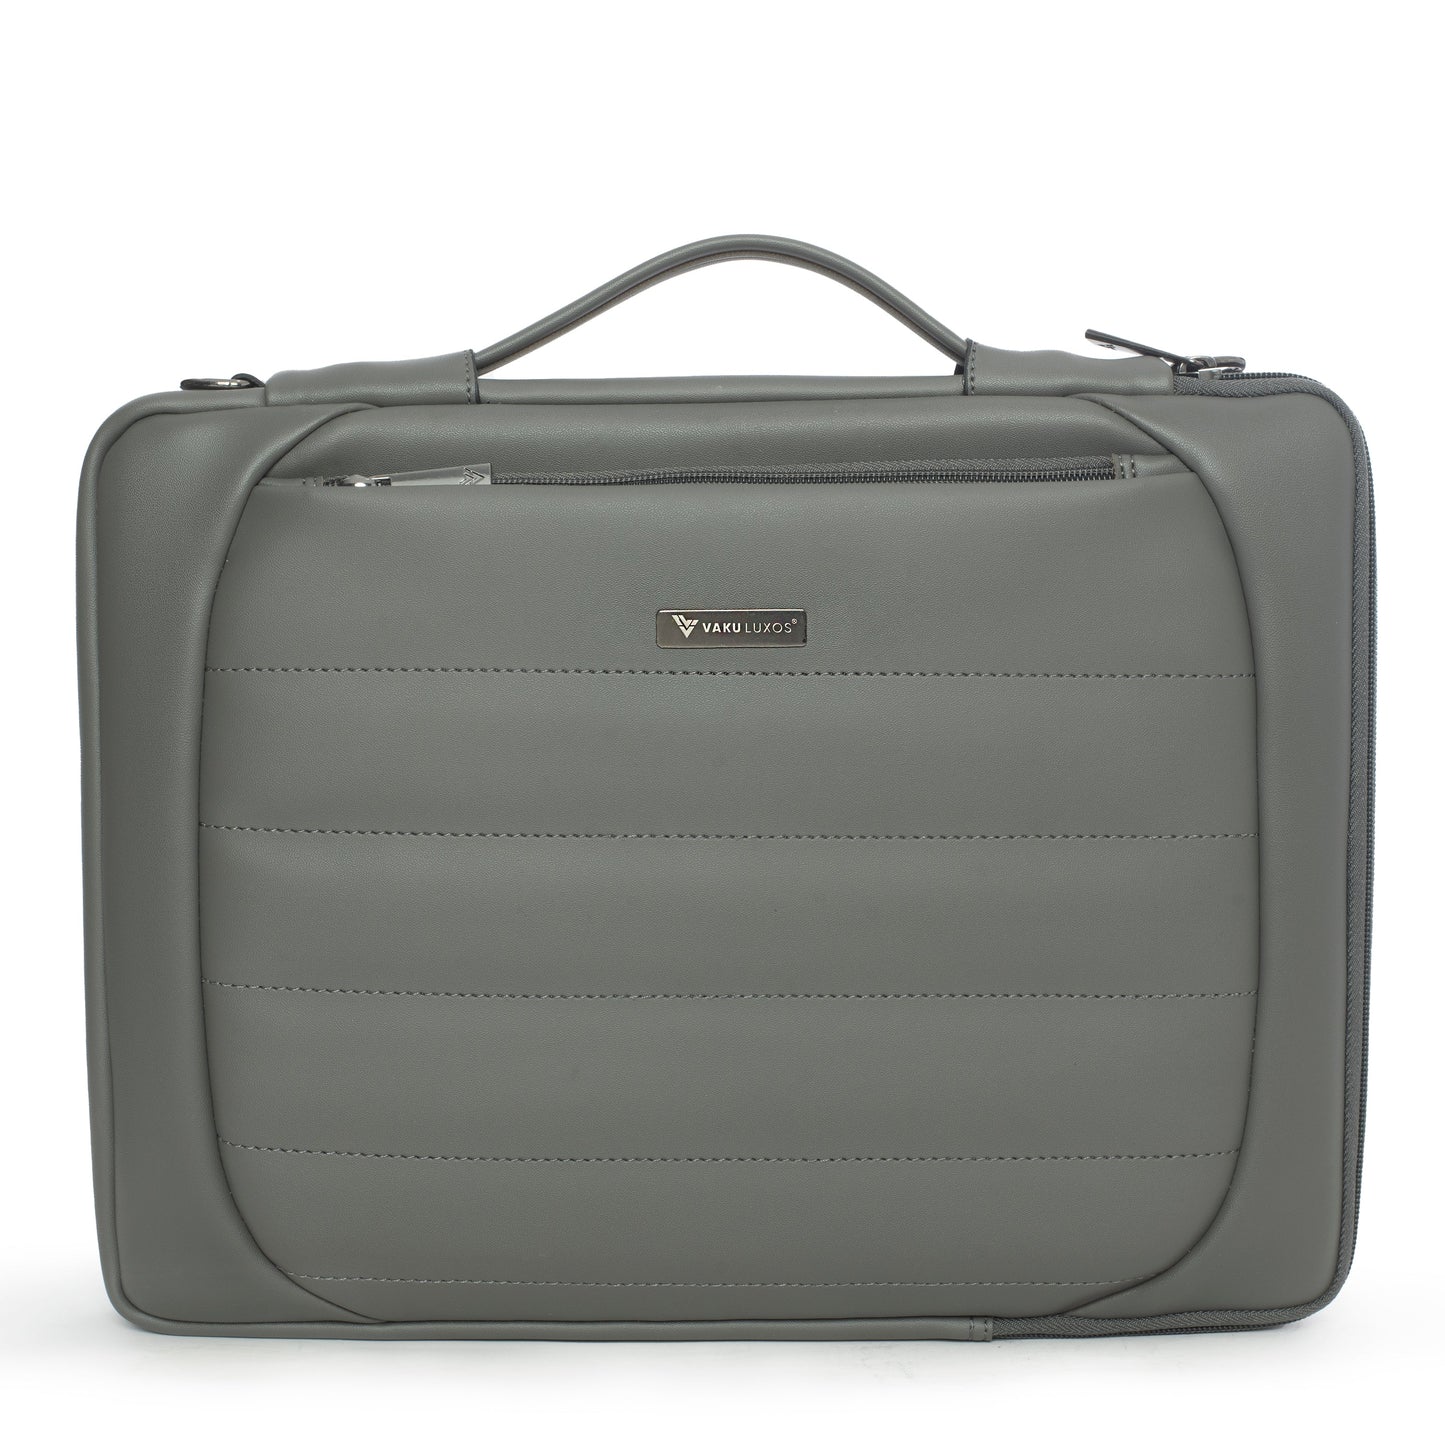 vaku-luxos®-lasa-chivelle-premium-collection-sleeve-for-macbook-13-14-with-strap-highly-durable-grey8905129019457